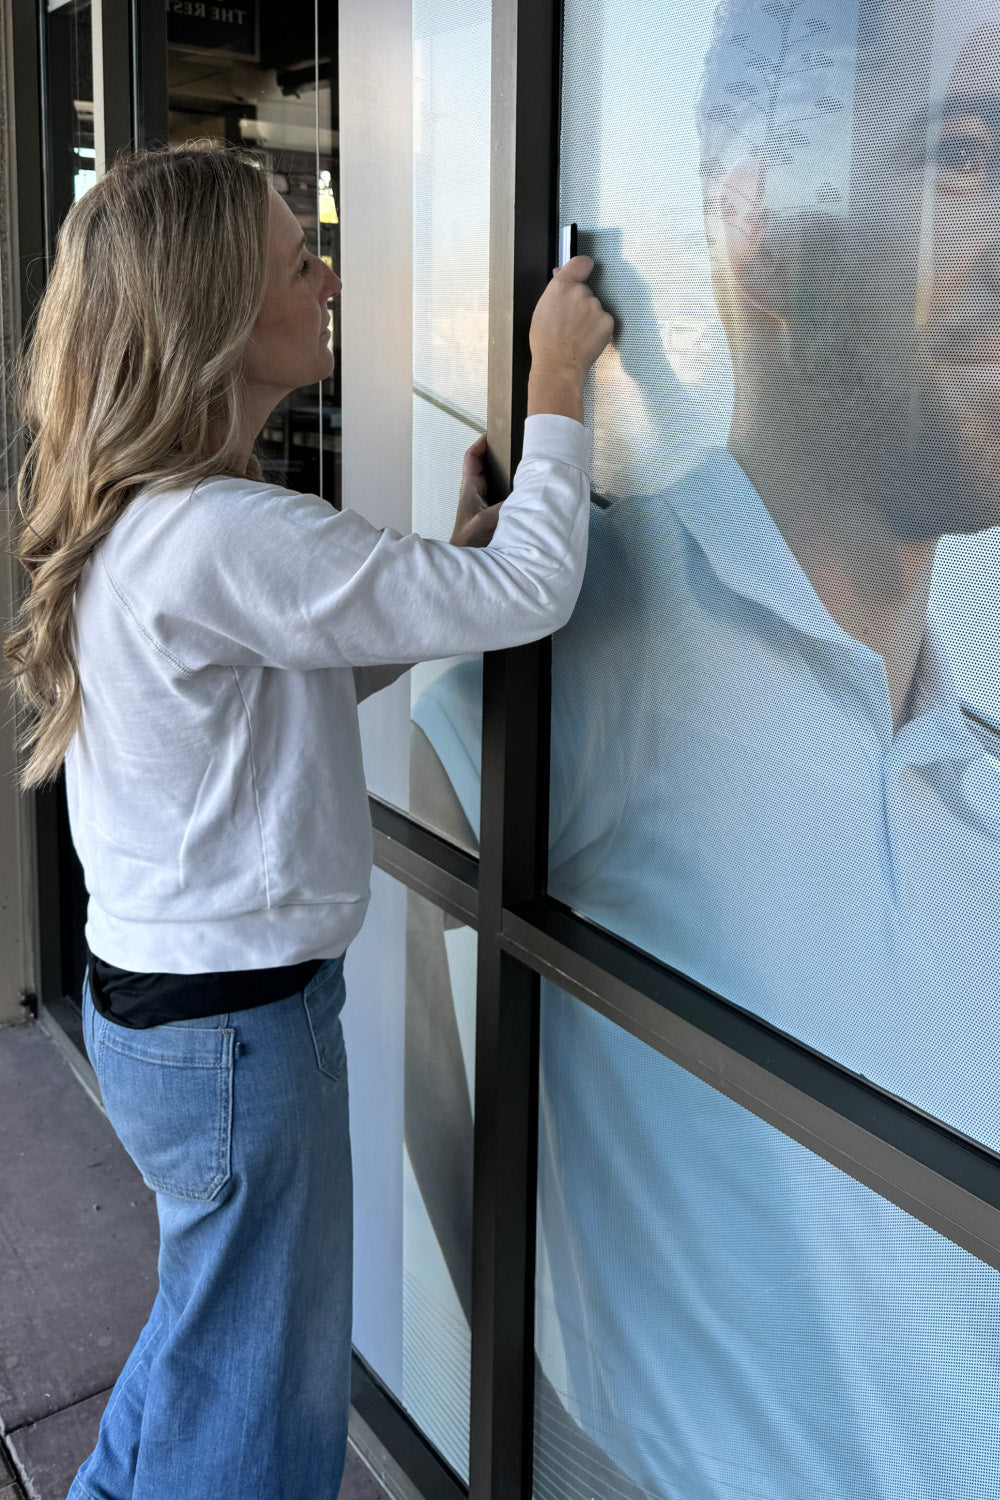 woman installing storefront display from urbanwalls